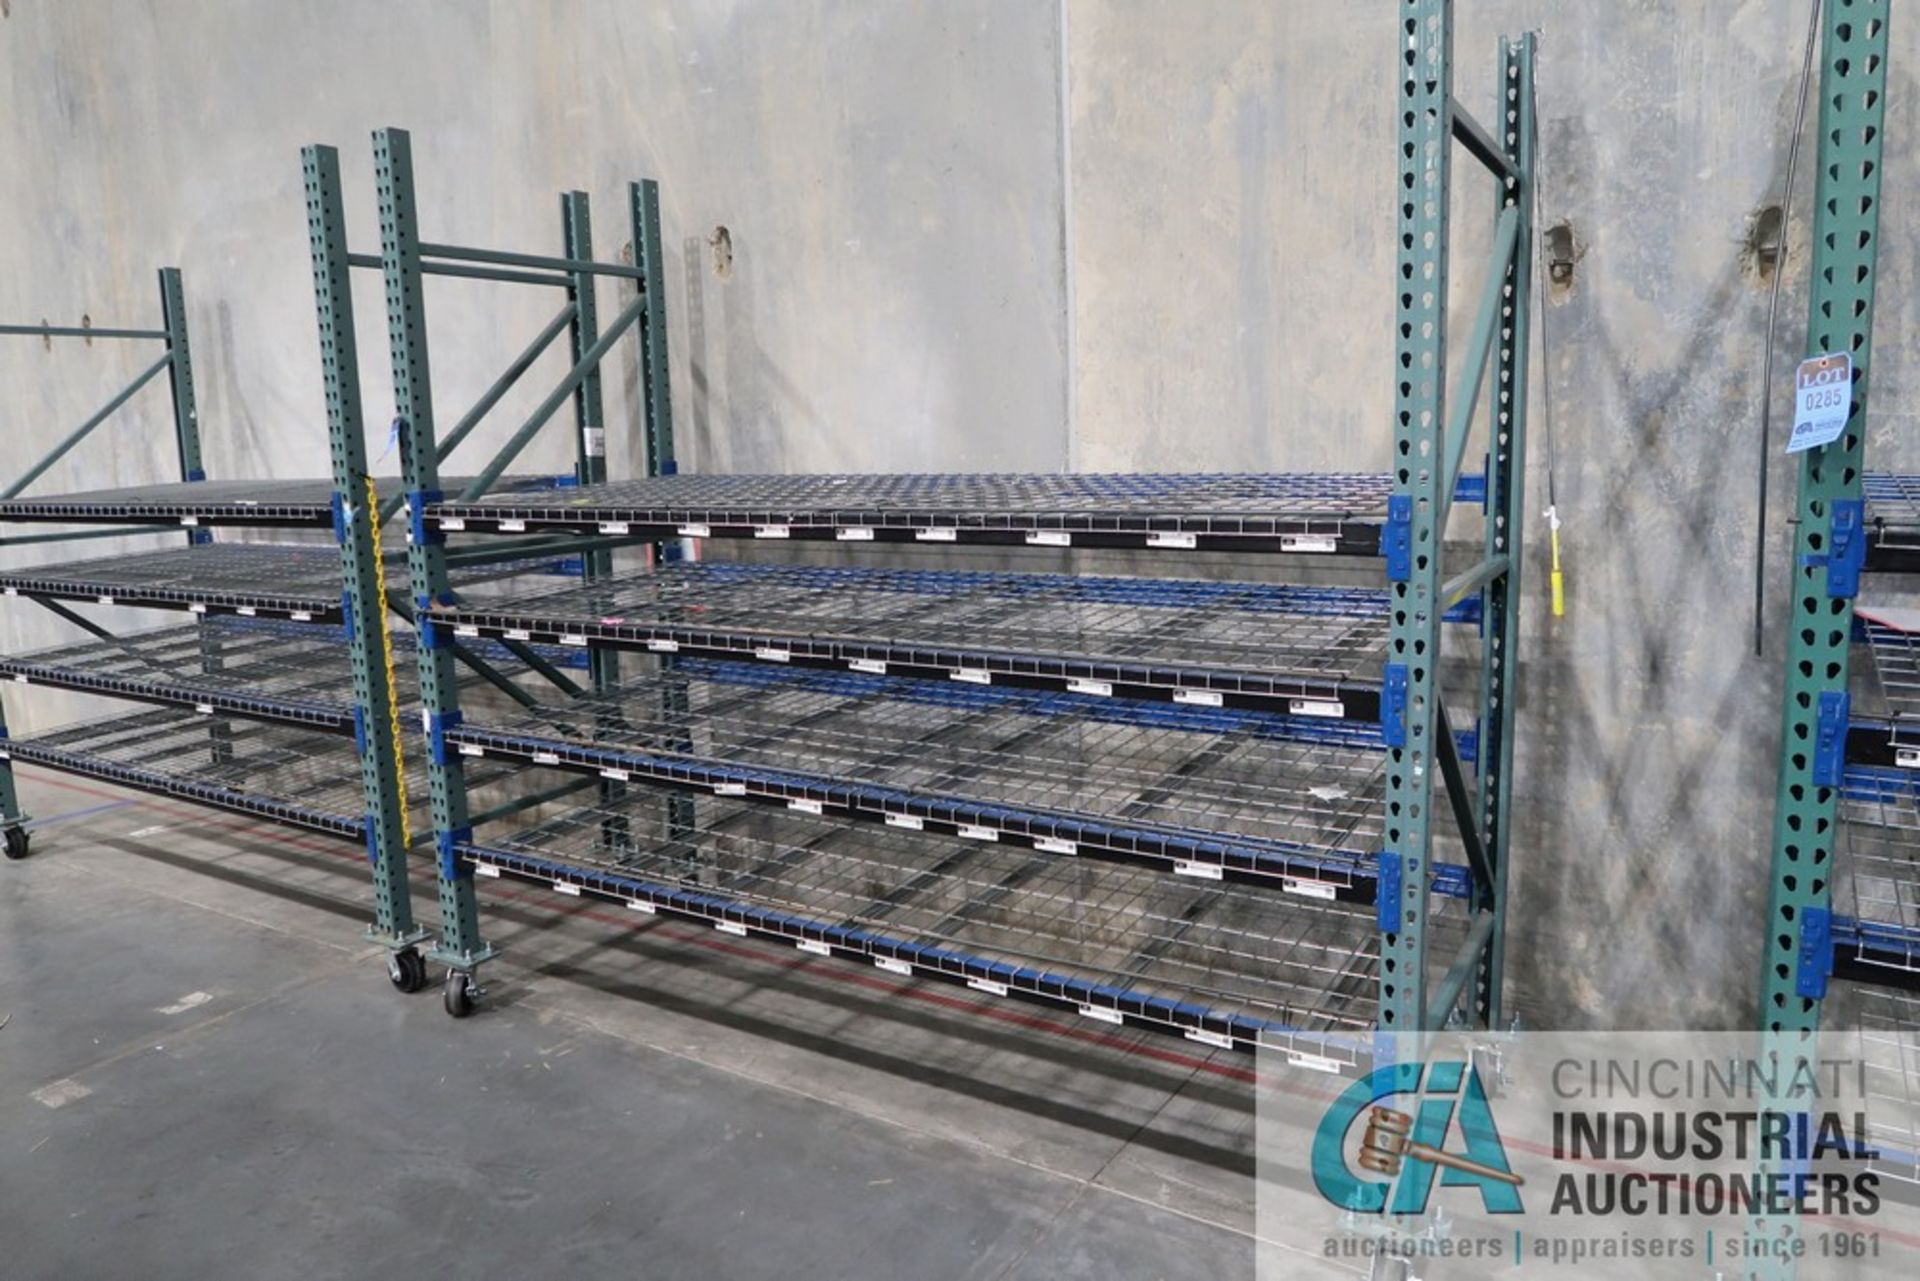 SECTION 108" LONG X 42" WIDE X 96" PORTABLE TEARDROP STYLE PALLET RACK WITH (2) 42" X 96" - Image 3 of 3